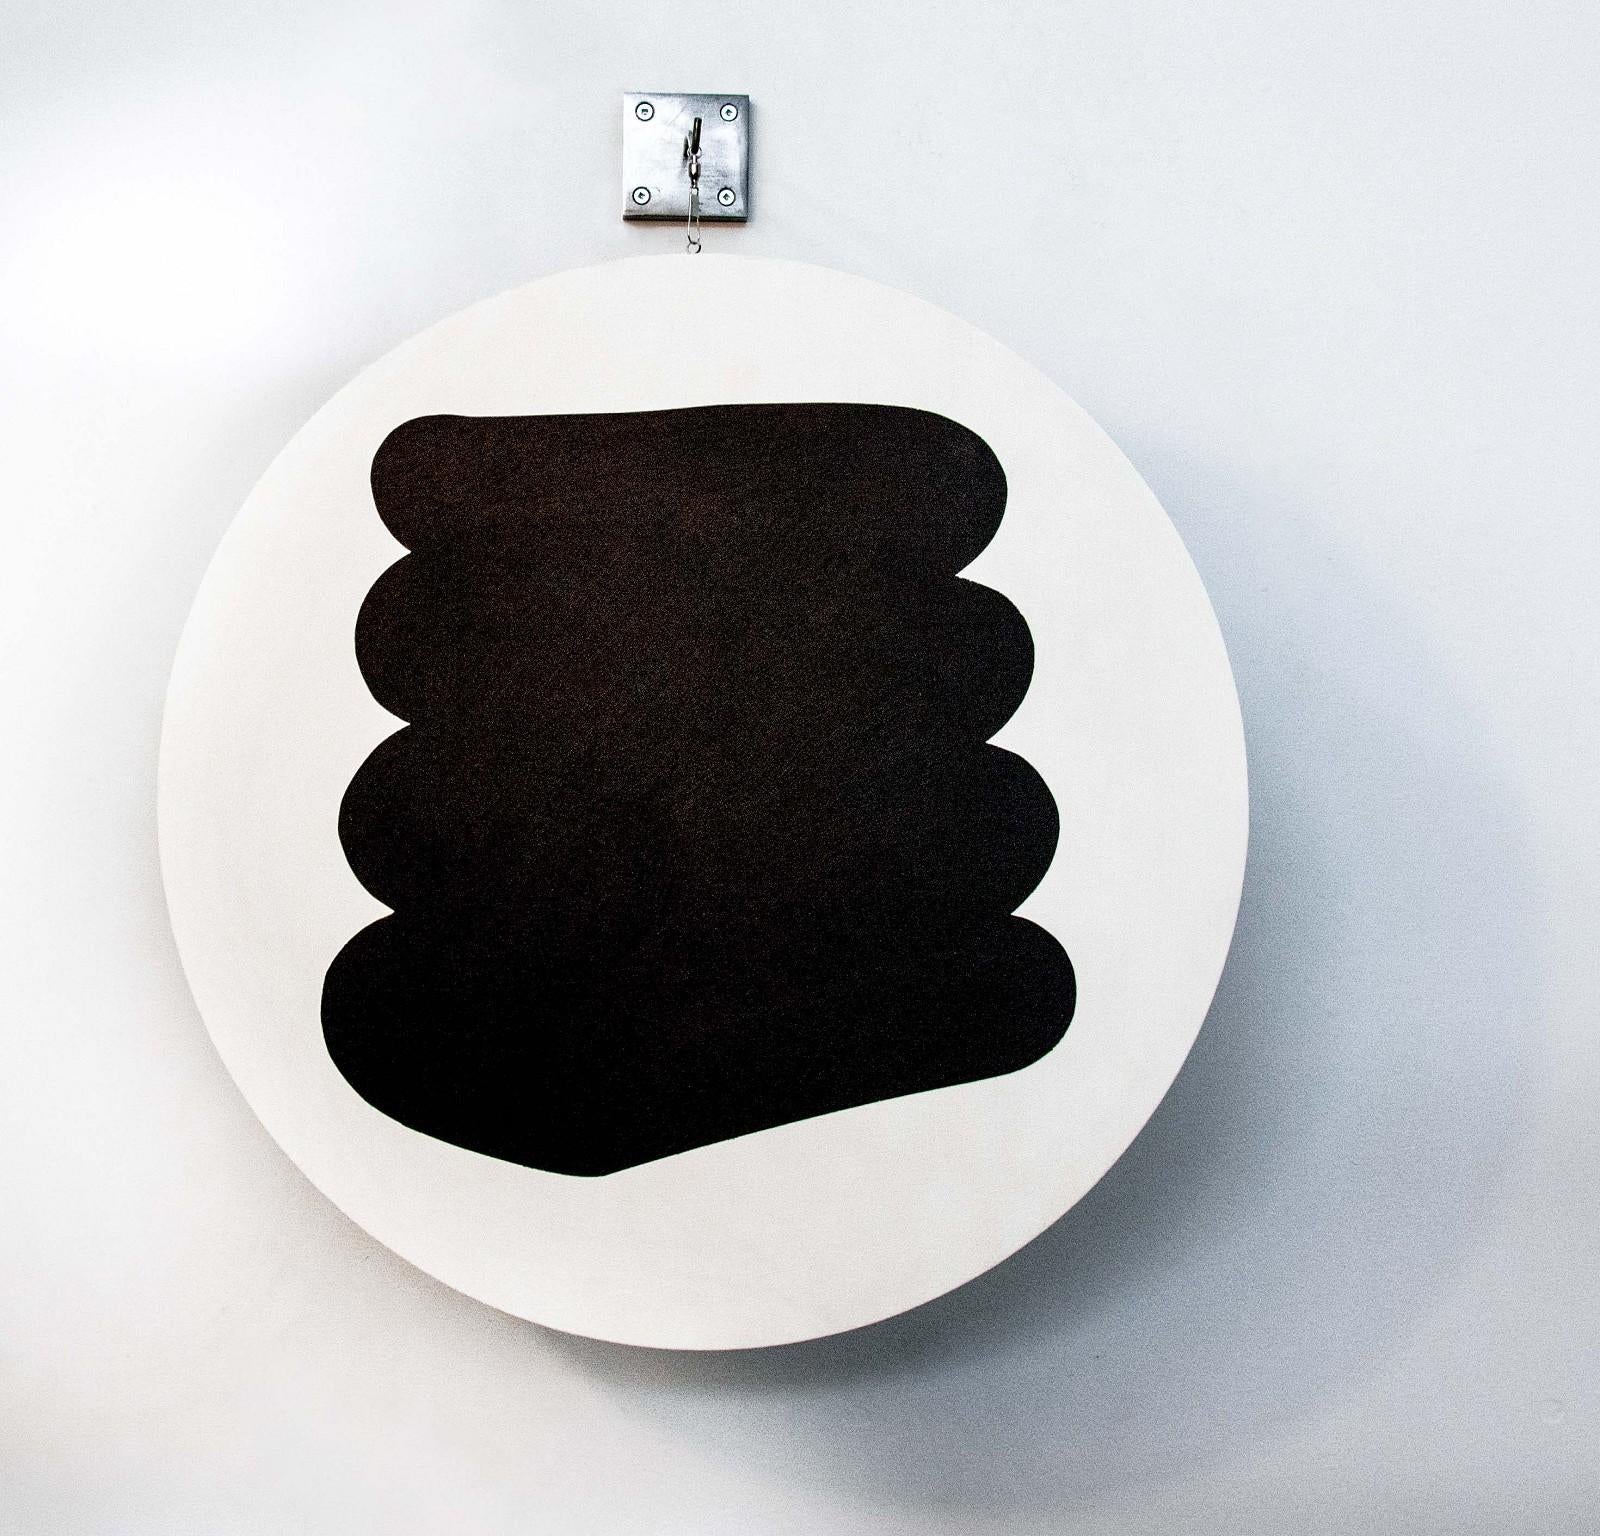 A Group of 3 Rounds containing various Black Shapes - hanging wall sculpture - Contemporary Sculpture by Aron Hill